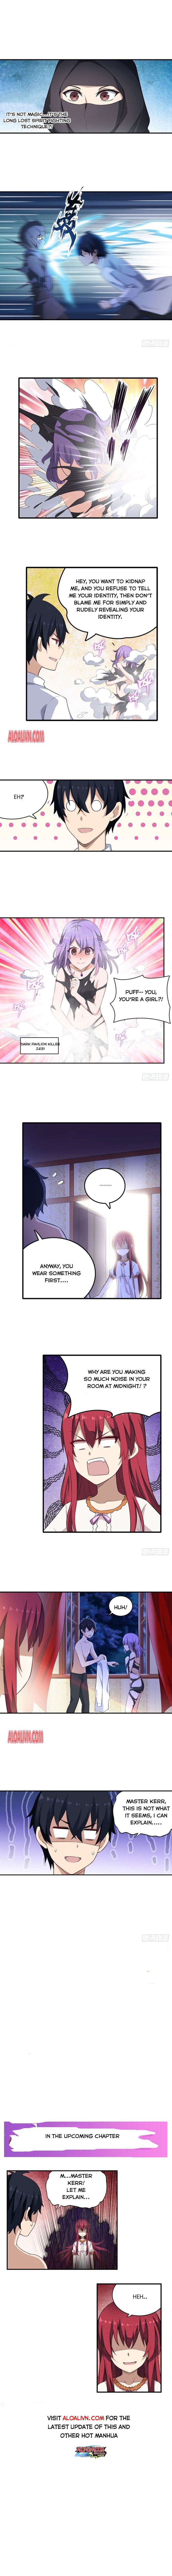 Infinite Apostles and Twelve War Girls Chapter 69 page 3